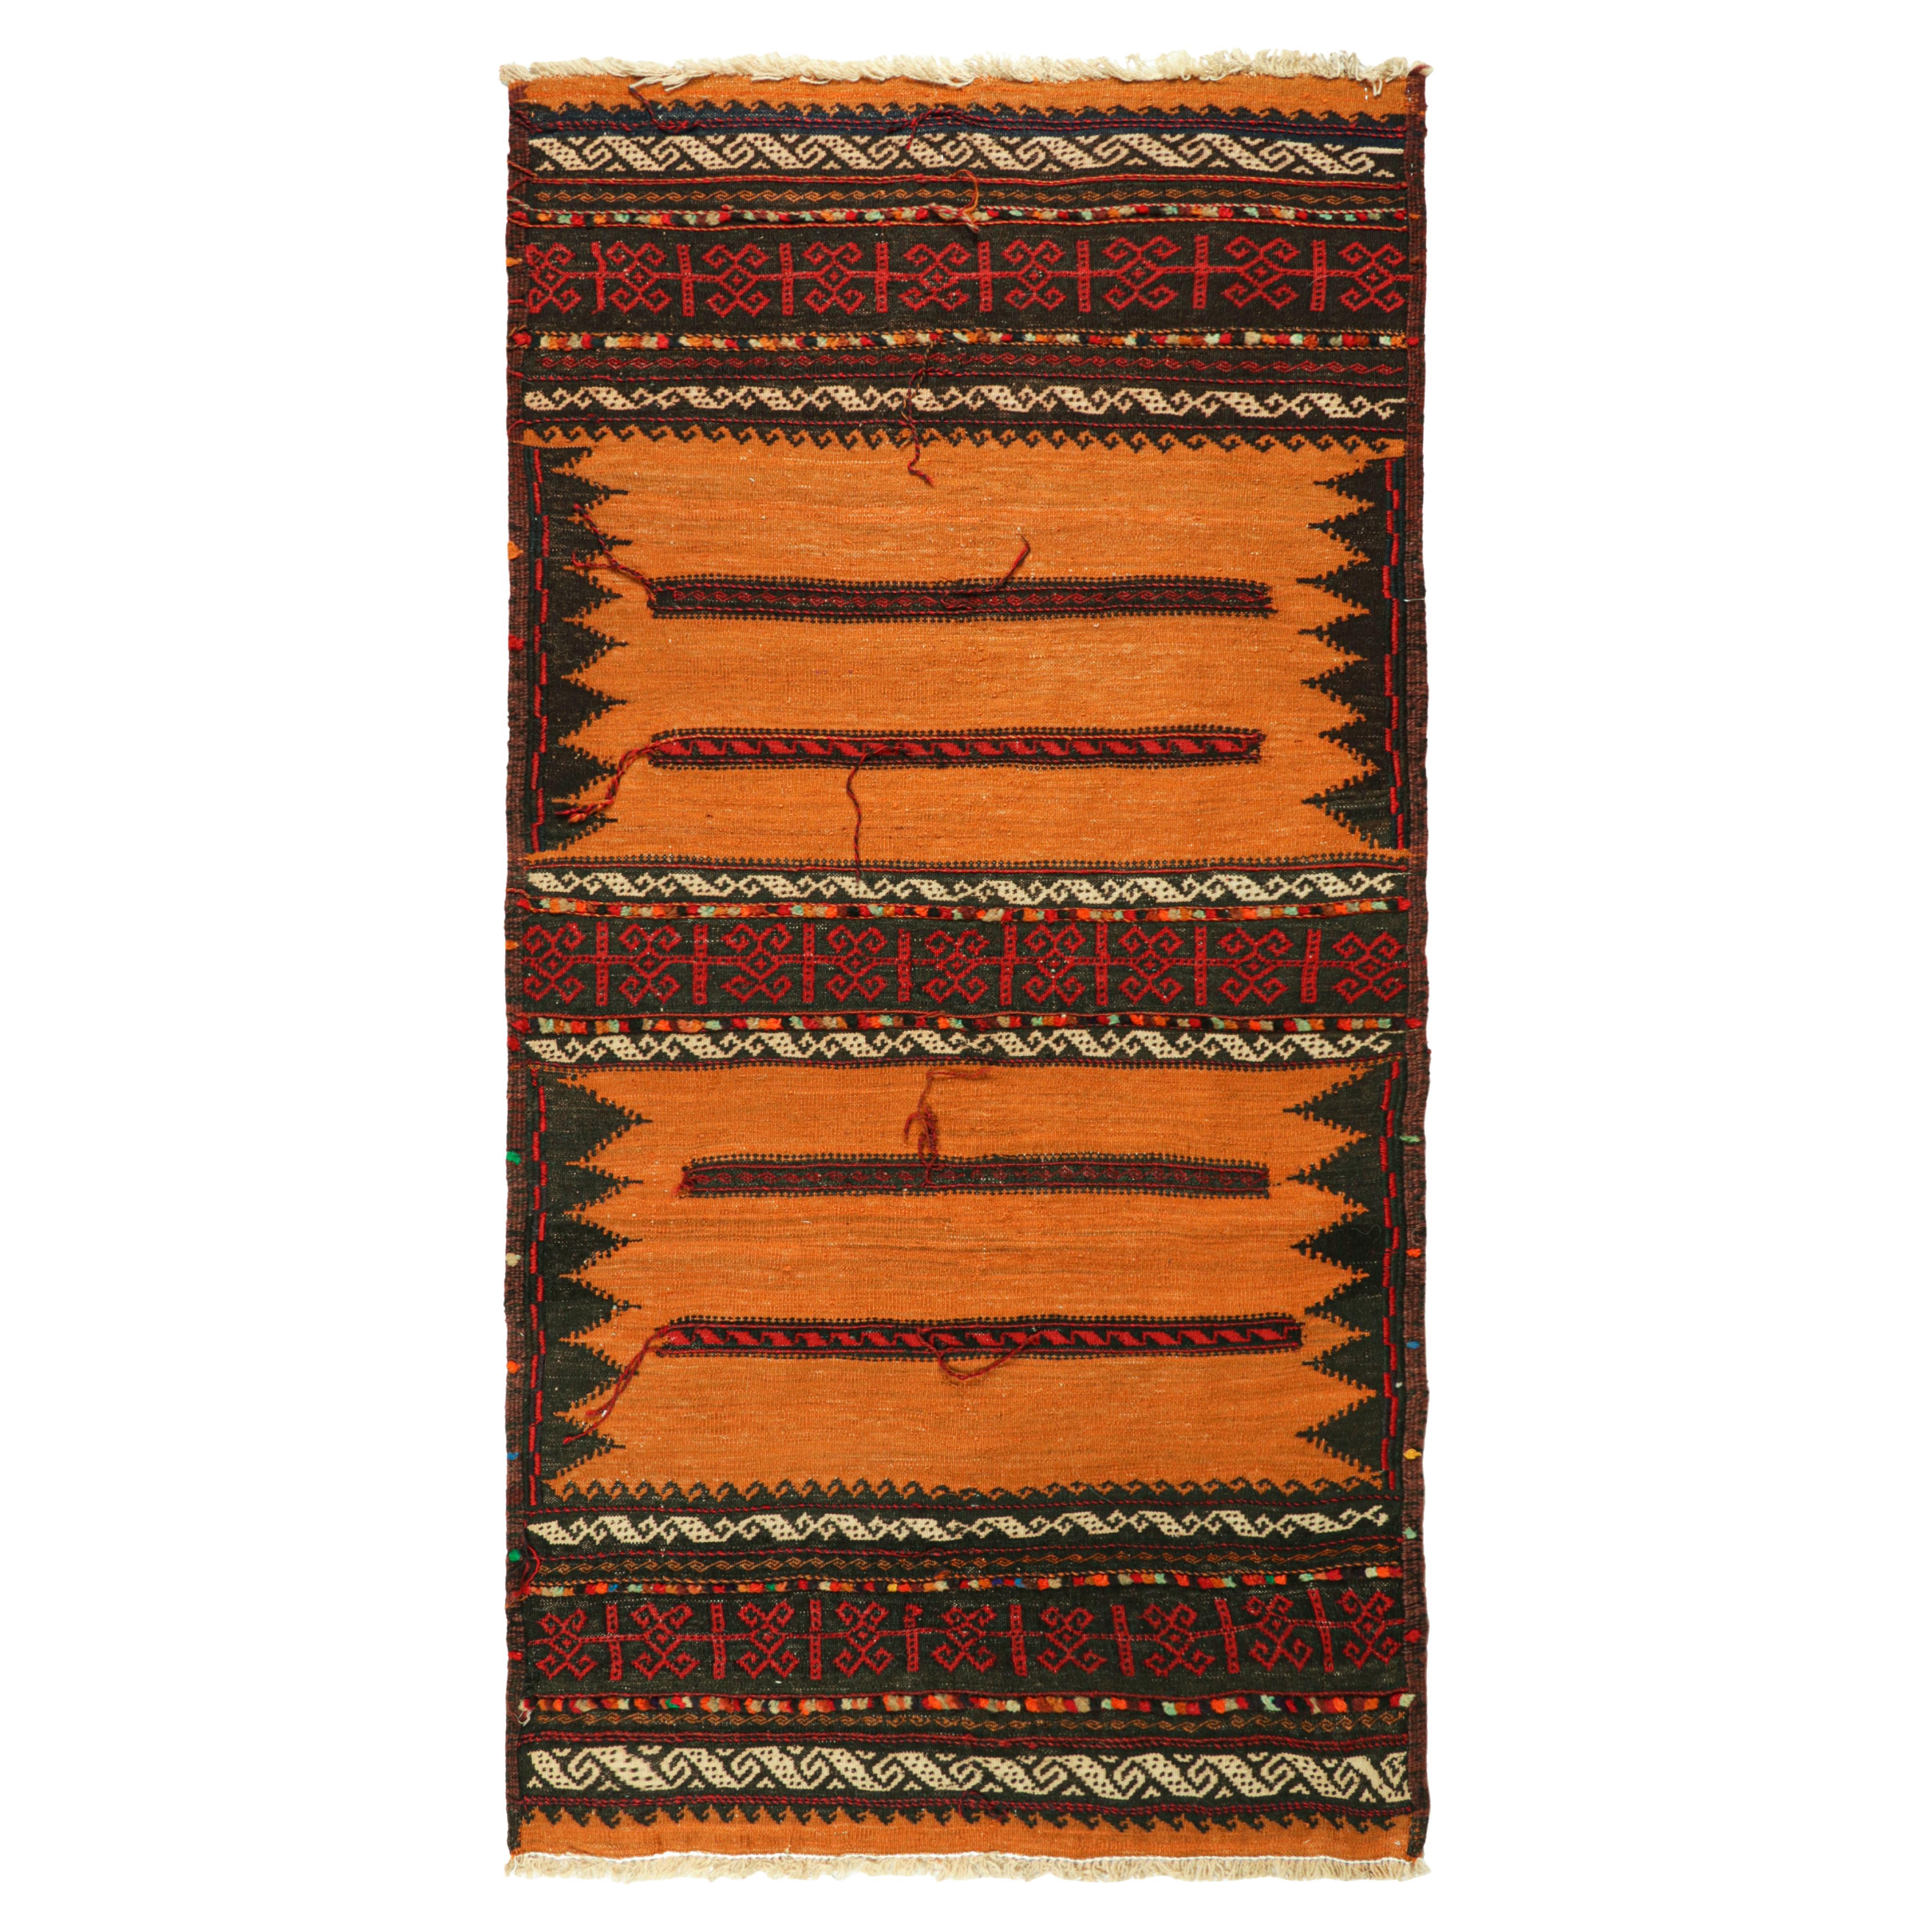 Vintage Afghan Kilim in Rust, with Polychromatic Patterns, from Rug & Kilim